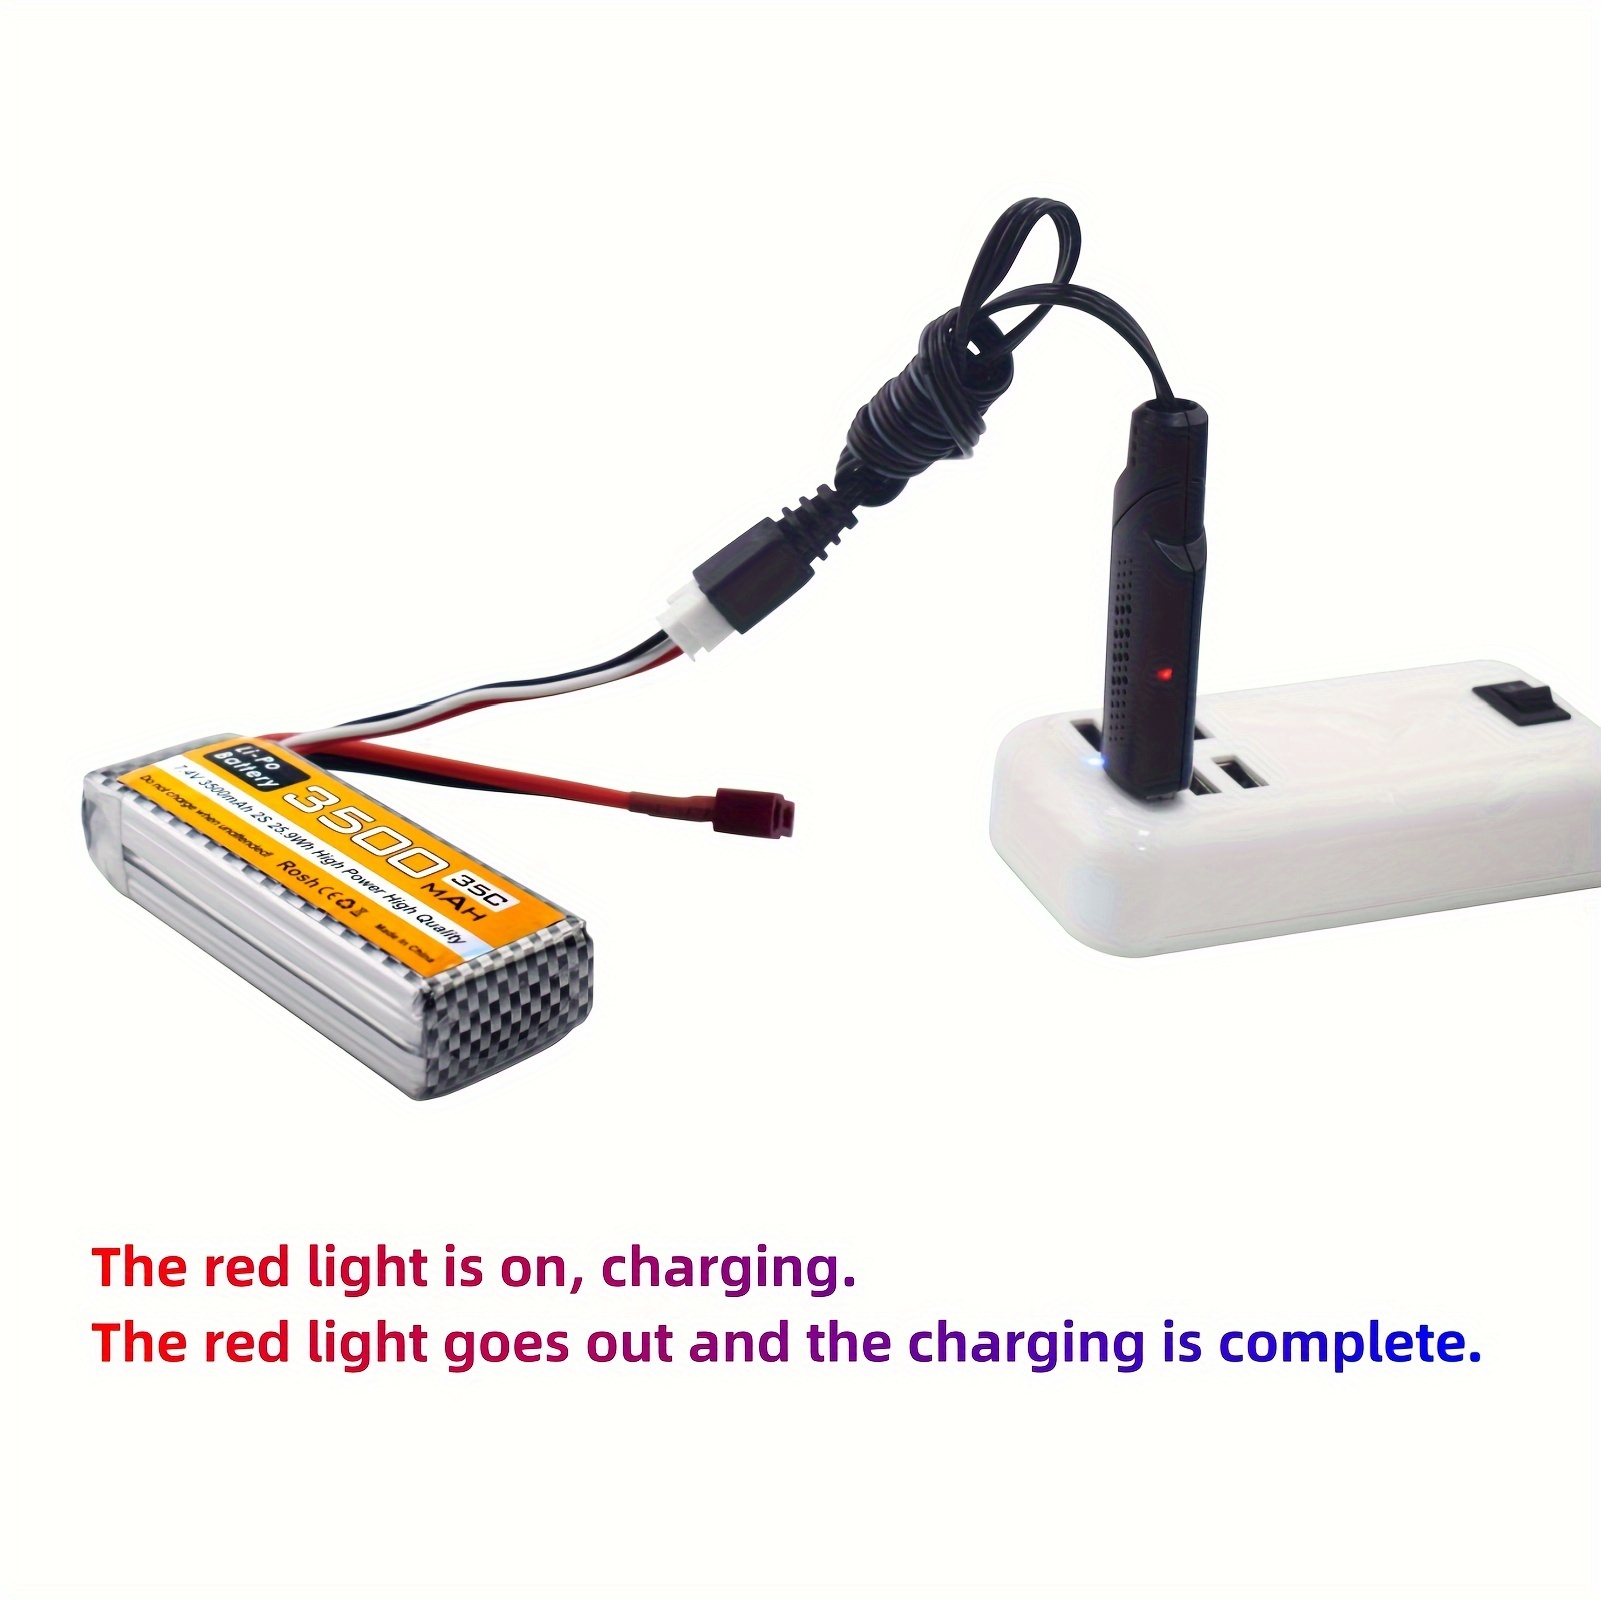 RC USB Charging Cable, RC Car Battery Charger 7.4V 1000mA Lipo Battery USB  Charger Charging Cable for 1:16 Remote Control Car